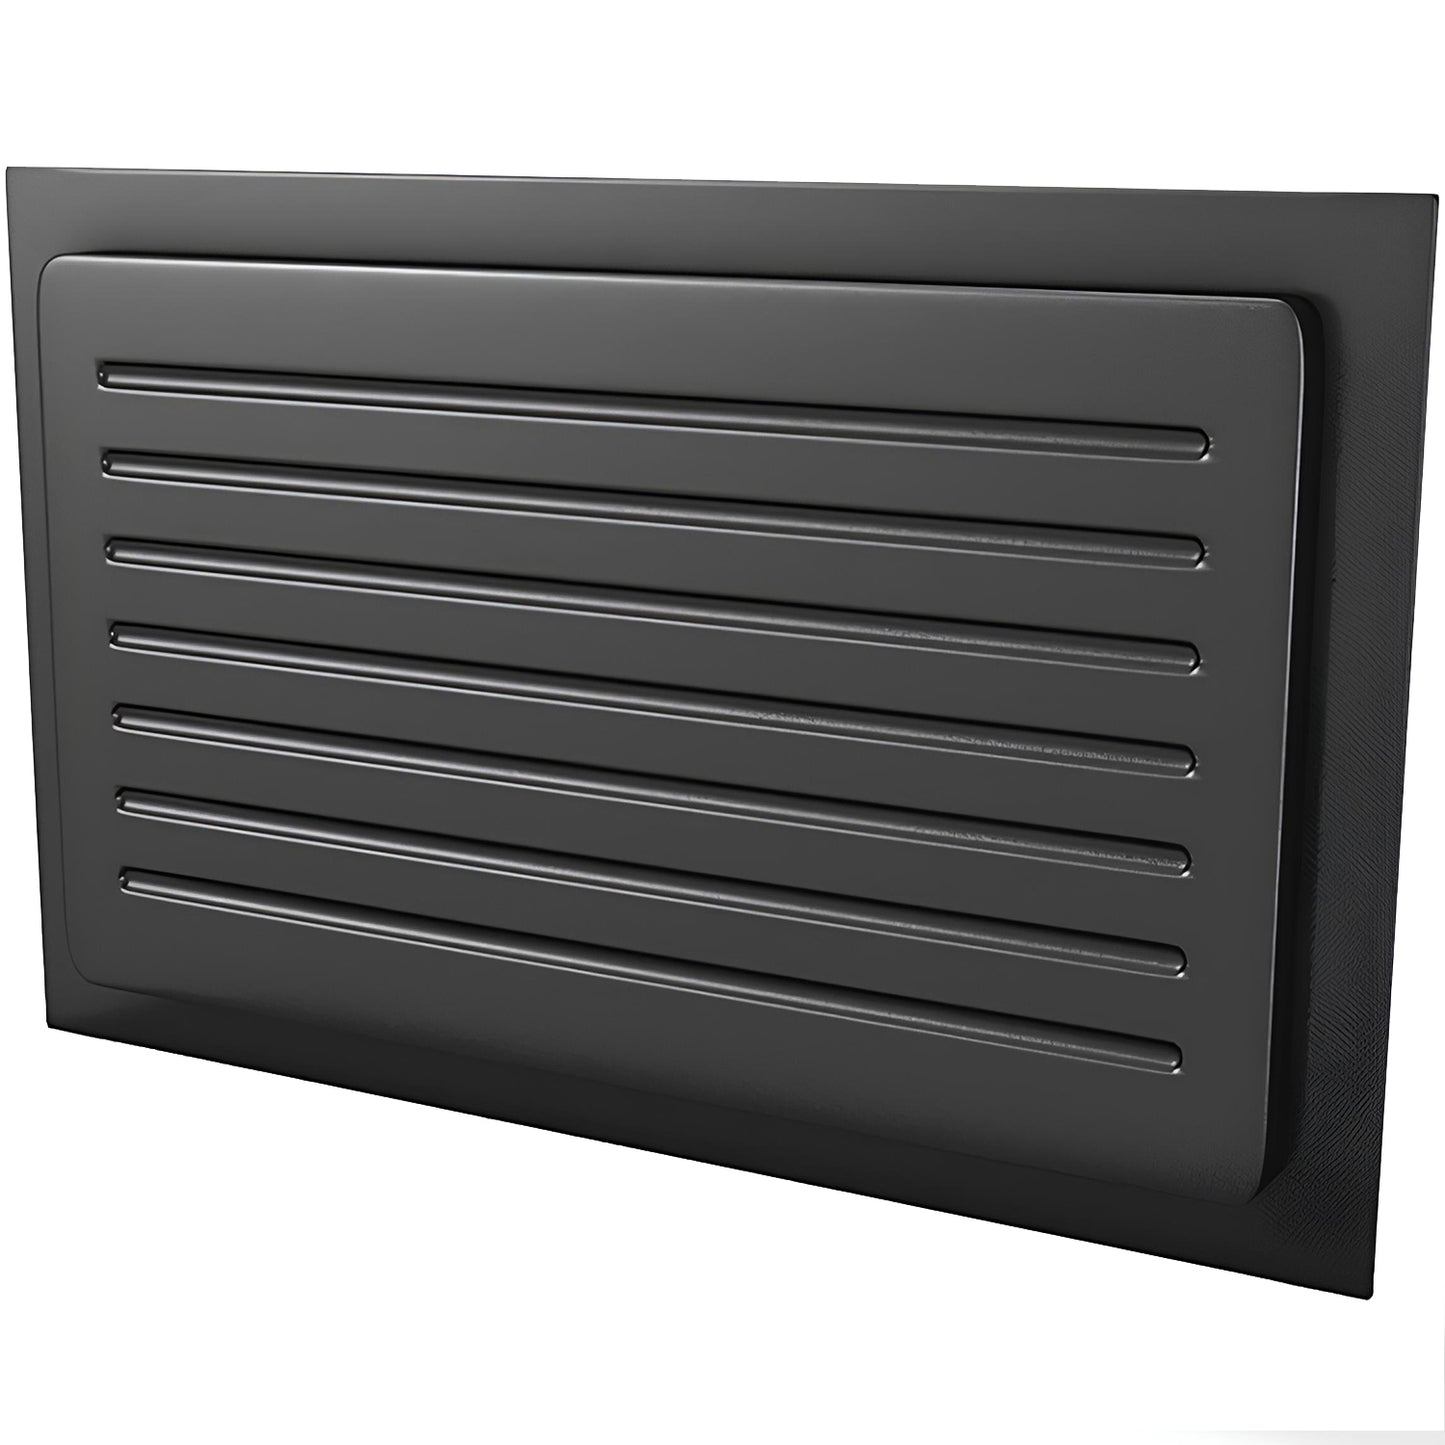 Small outward mounted foundation vent cover (black)